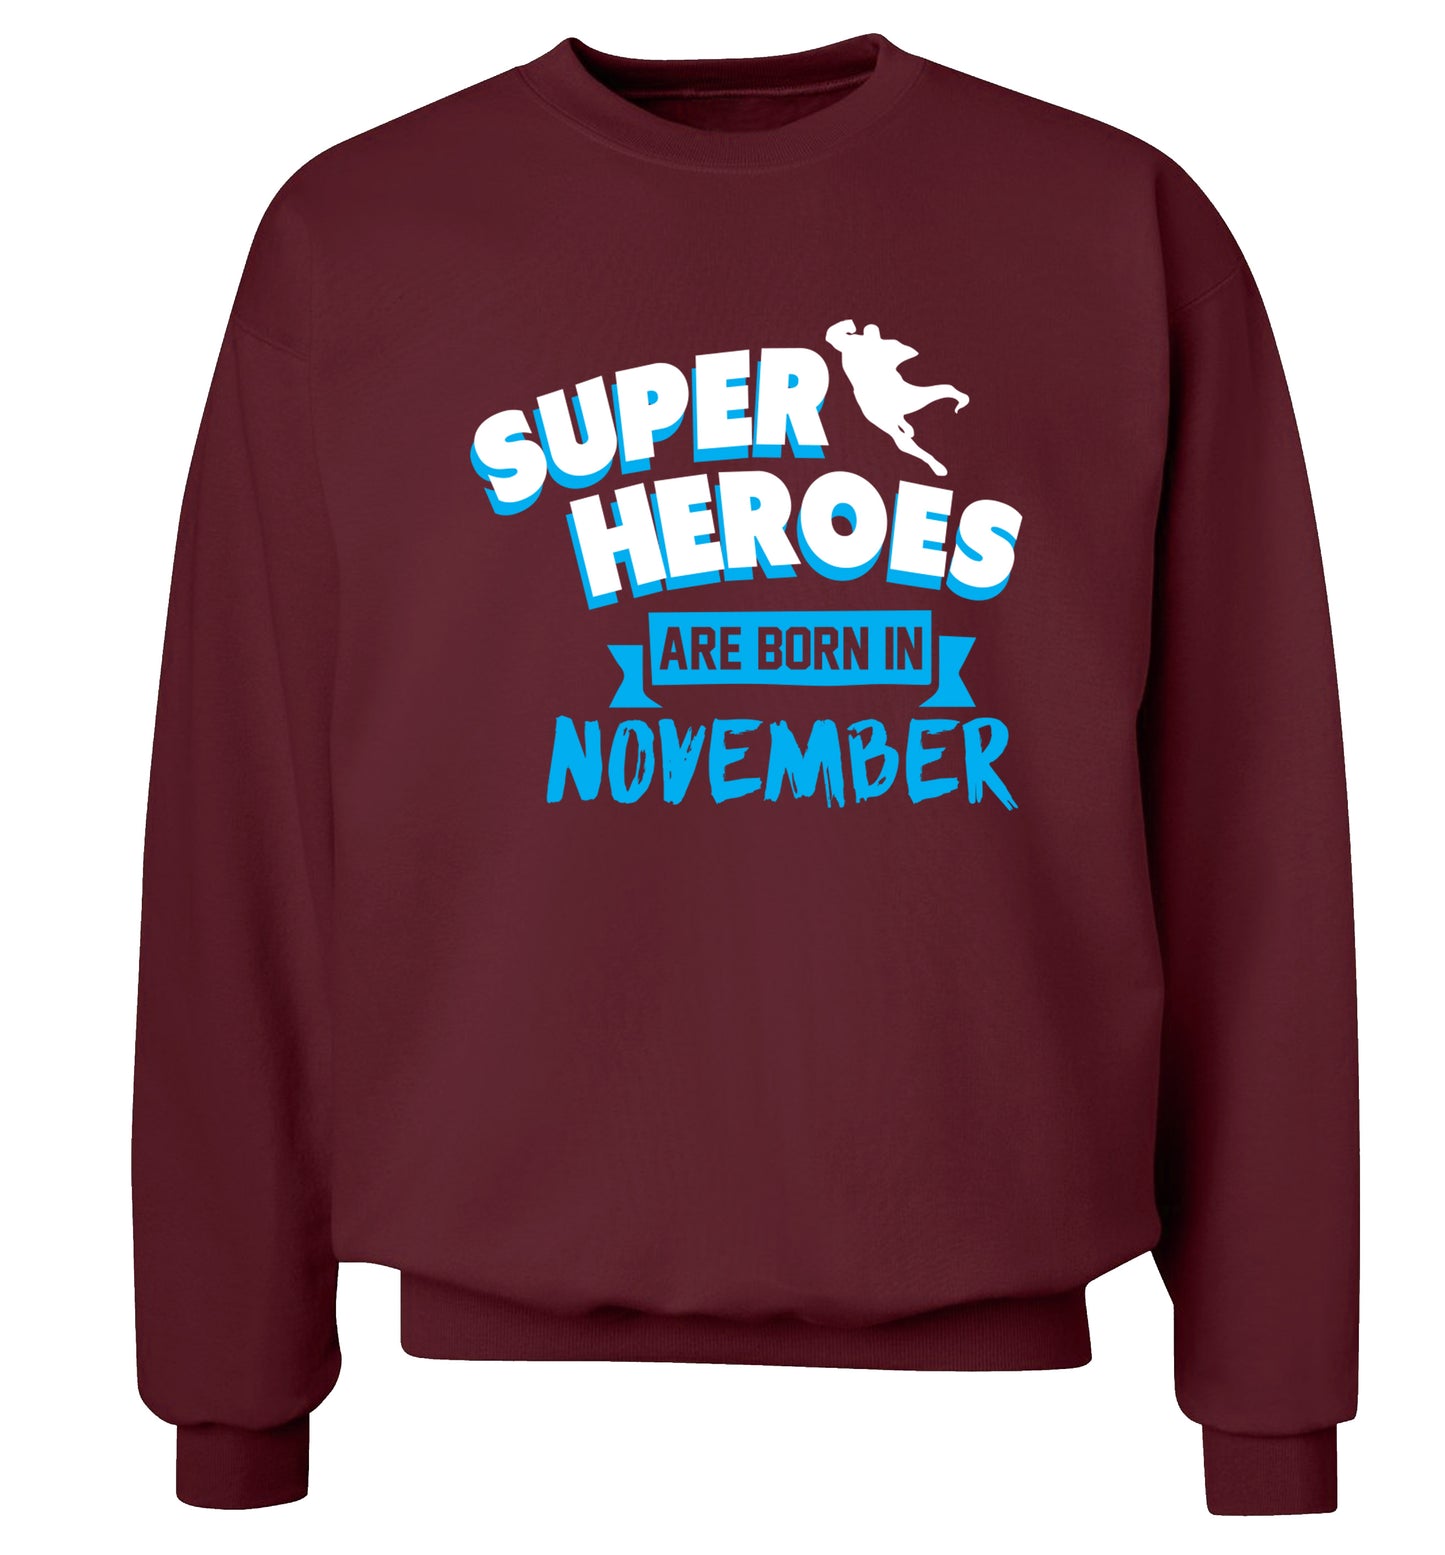 Superheroes are born in November Adult's unisex maroon Sweater 2XL